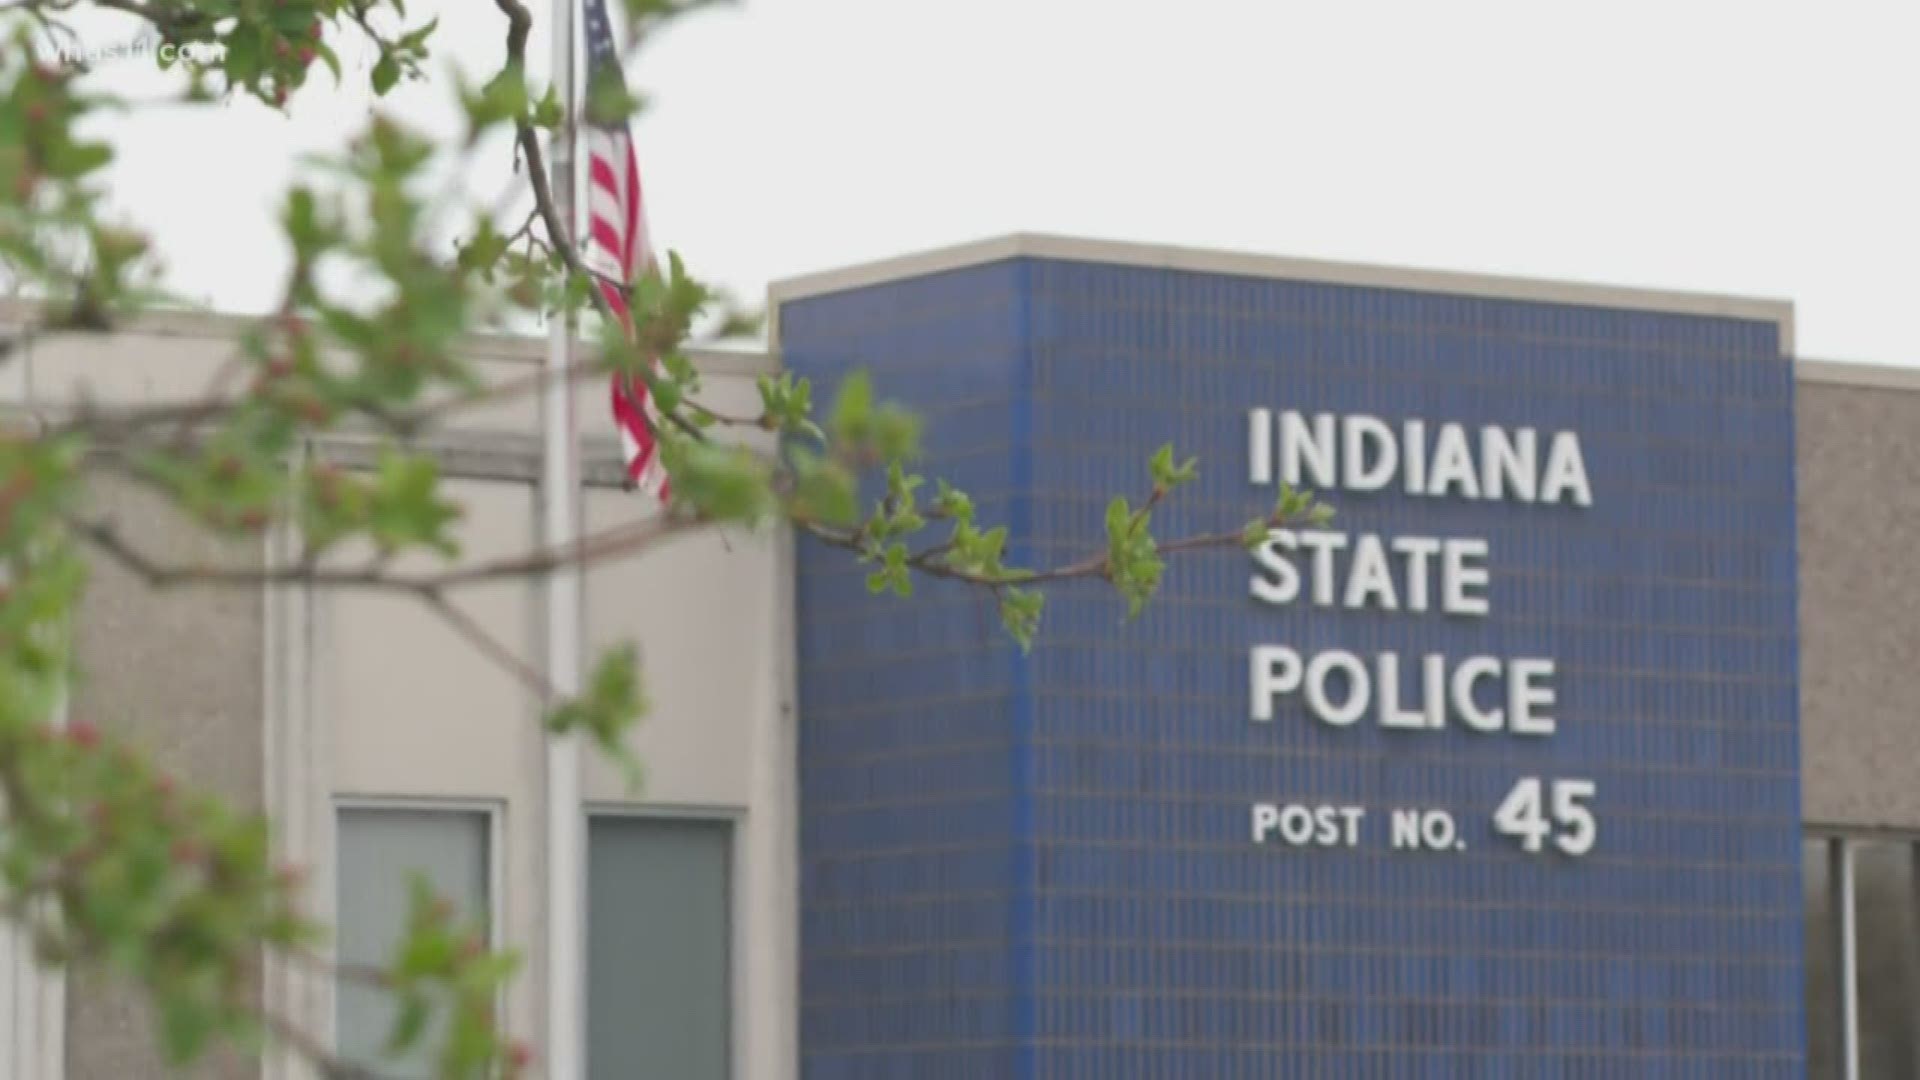 Indiana State Police say arrests for violation of the order have already been made.